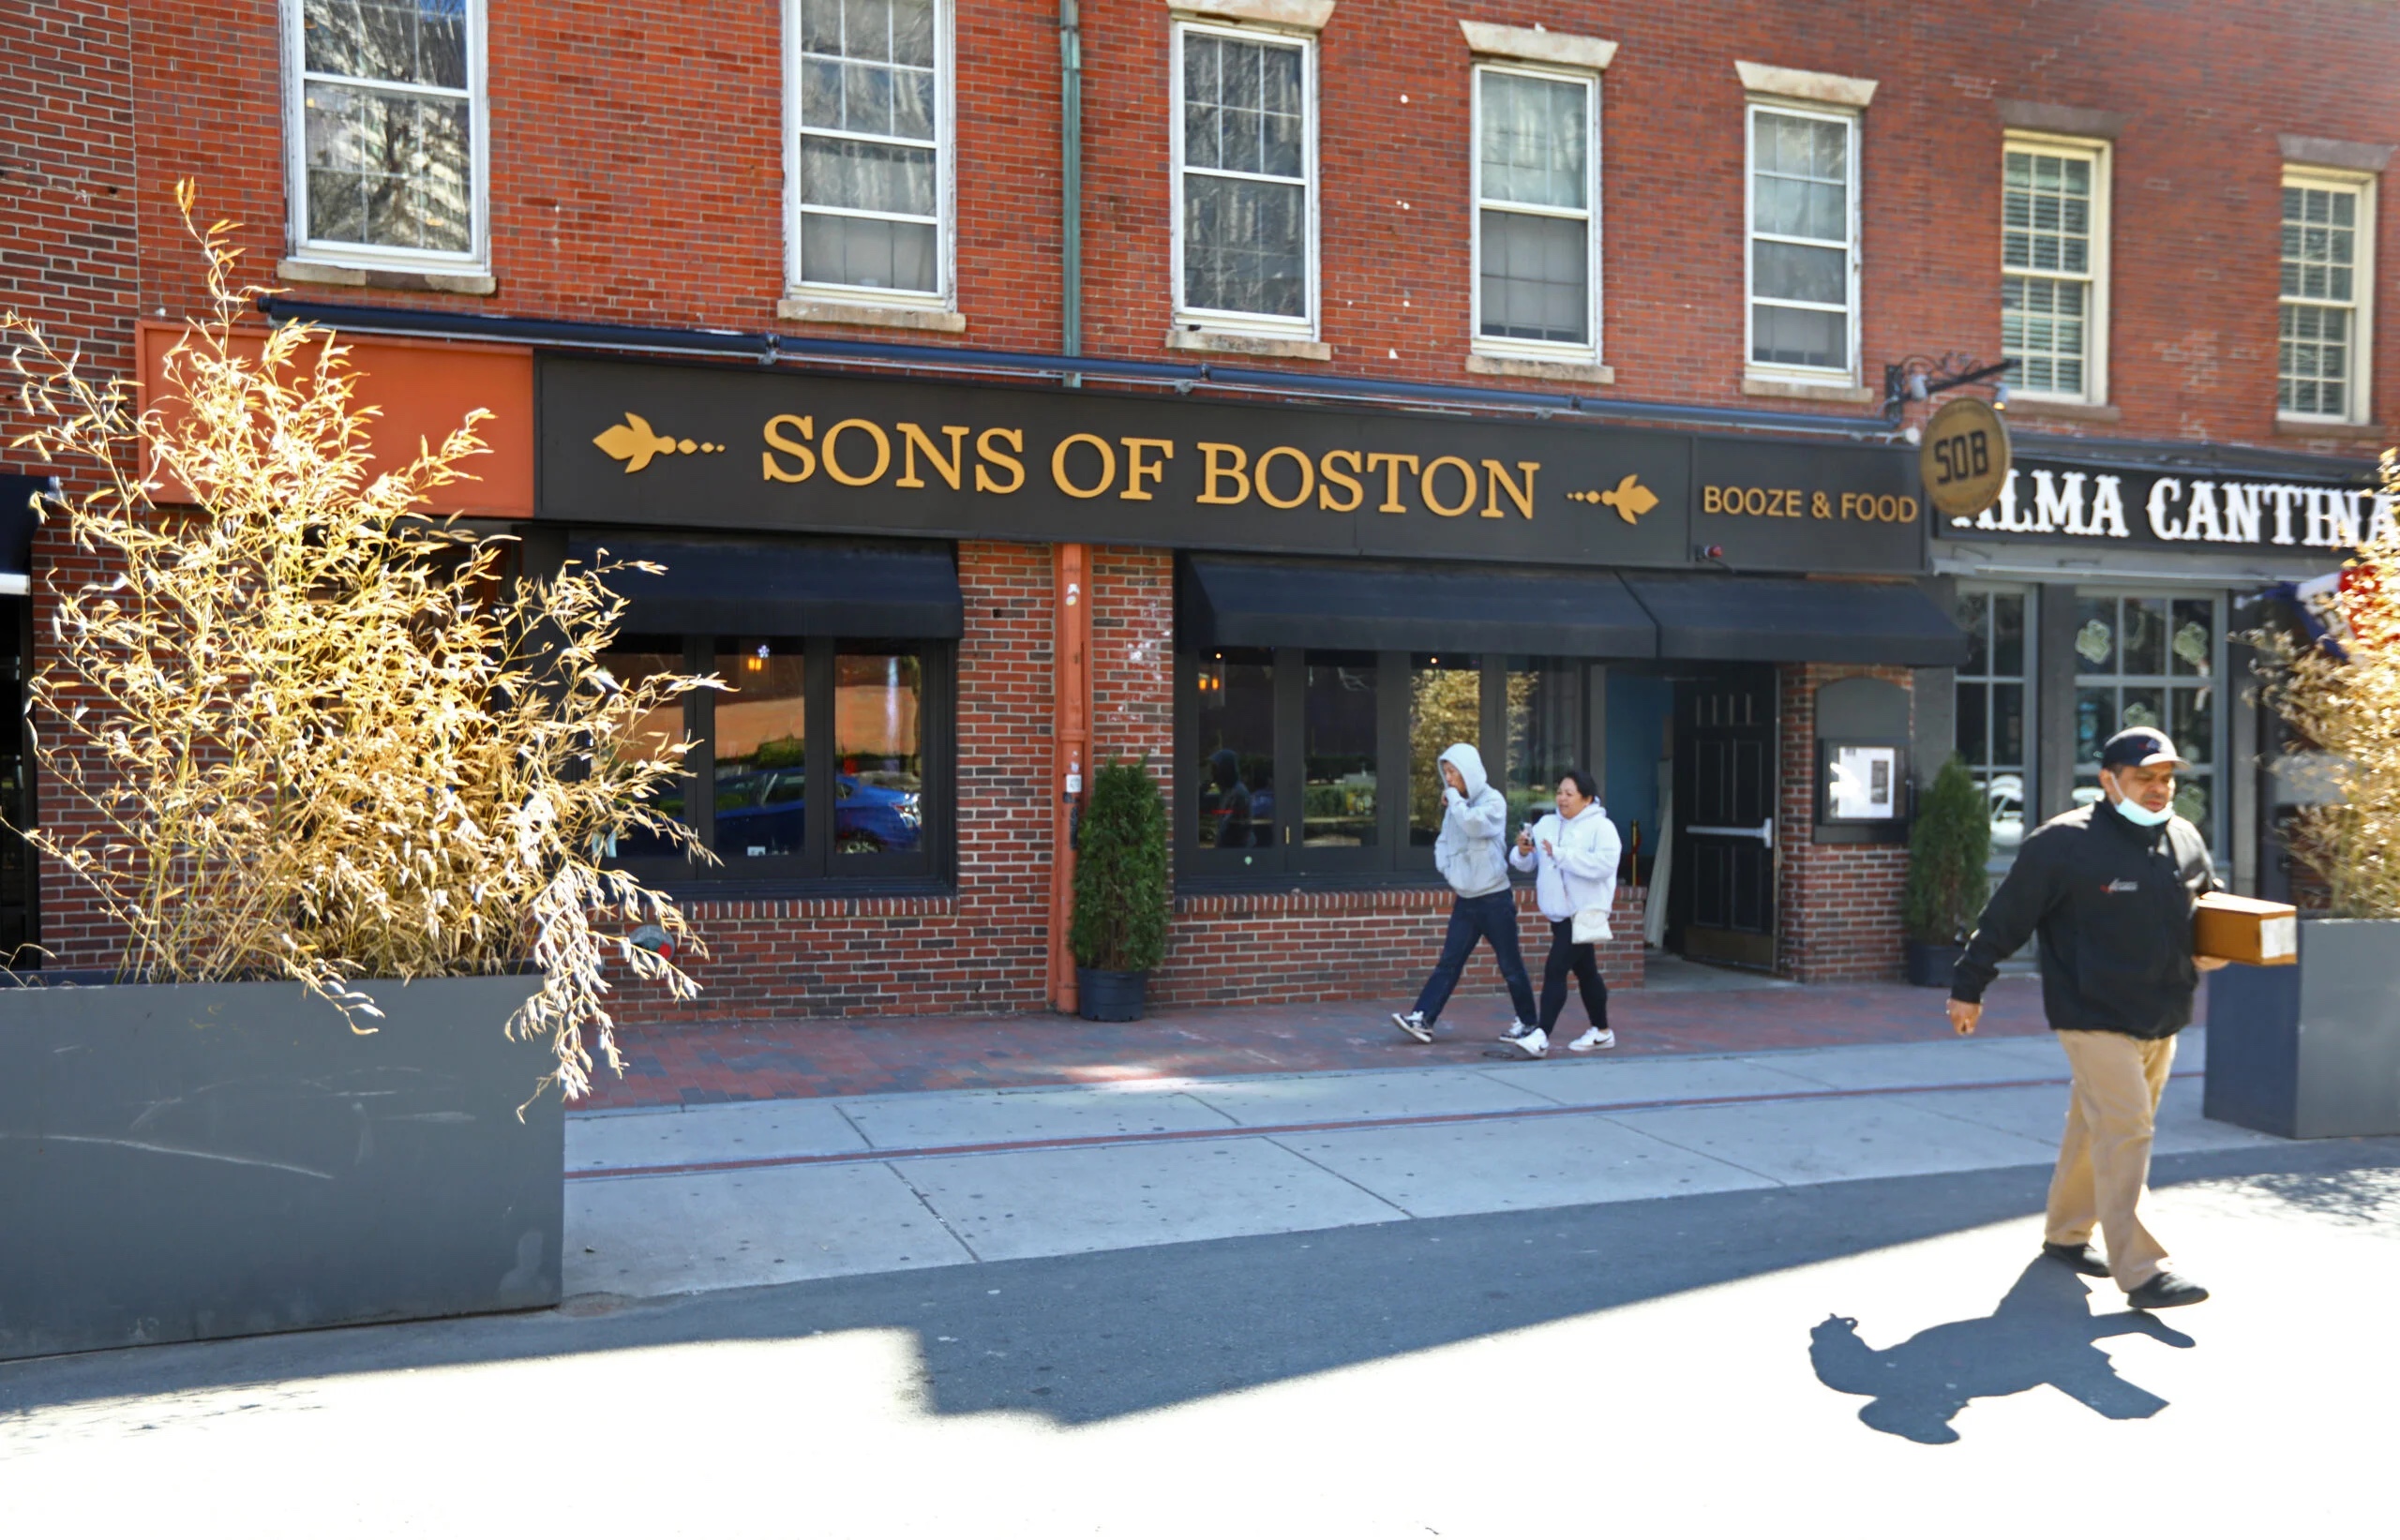 Following the Reported Death of a Marine by a Bouncer, Owners of a Boston Pub Will Reopen Under a New Name.